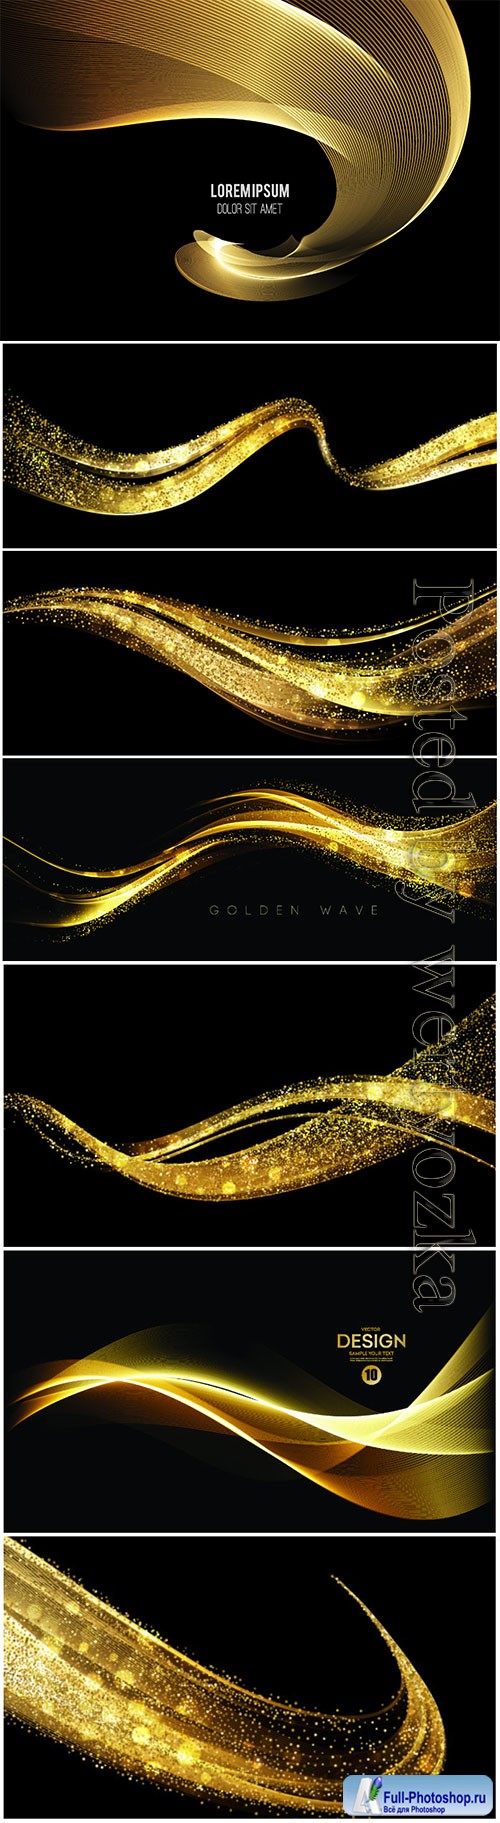 Abstract golden waves on vector backgrounds